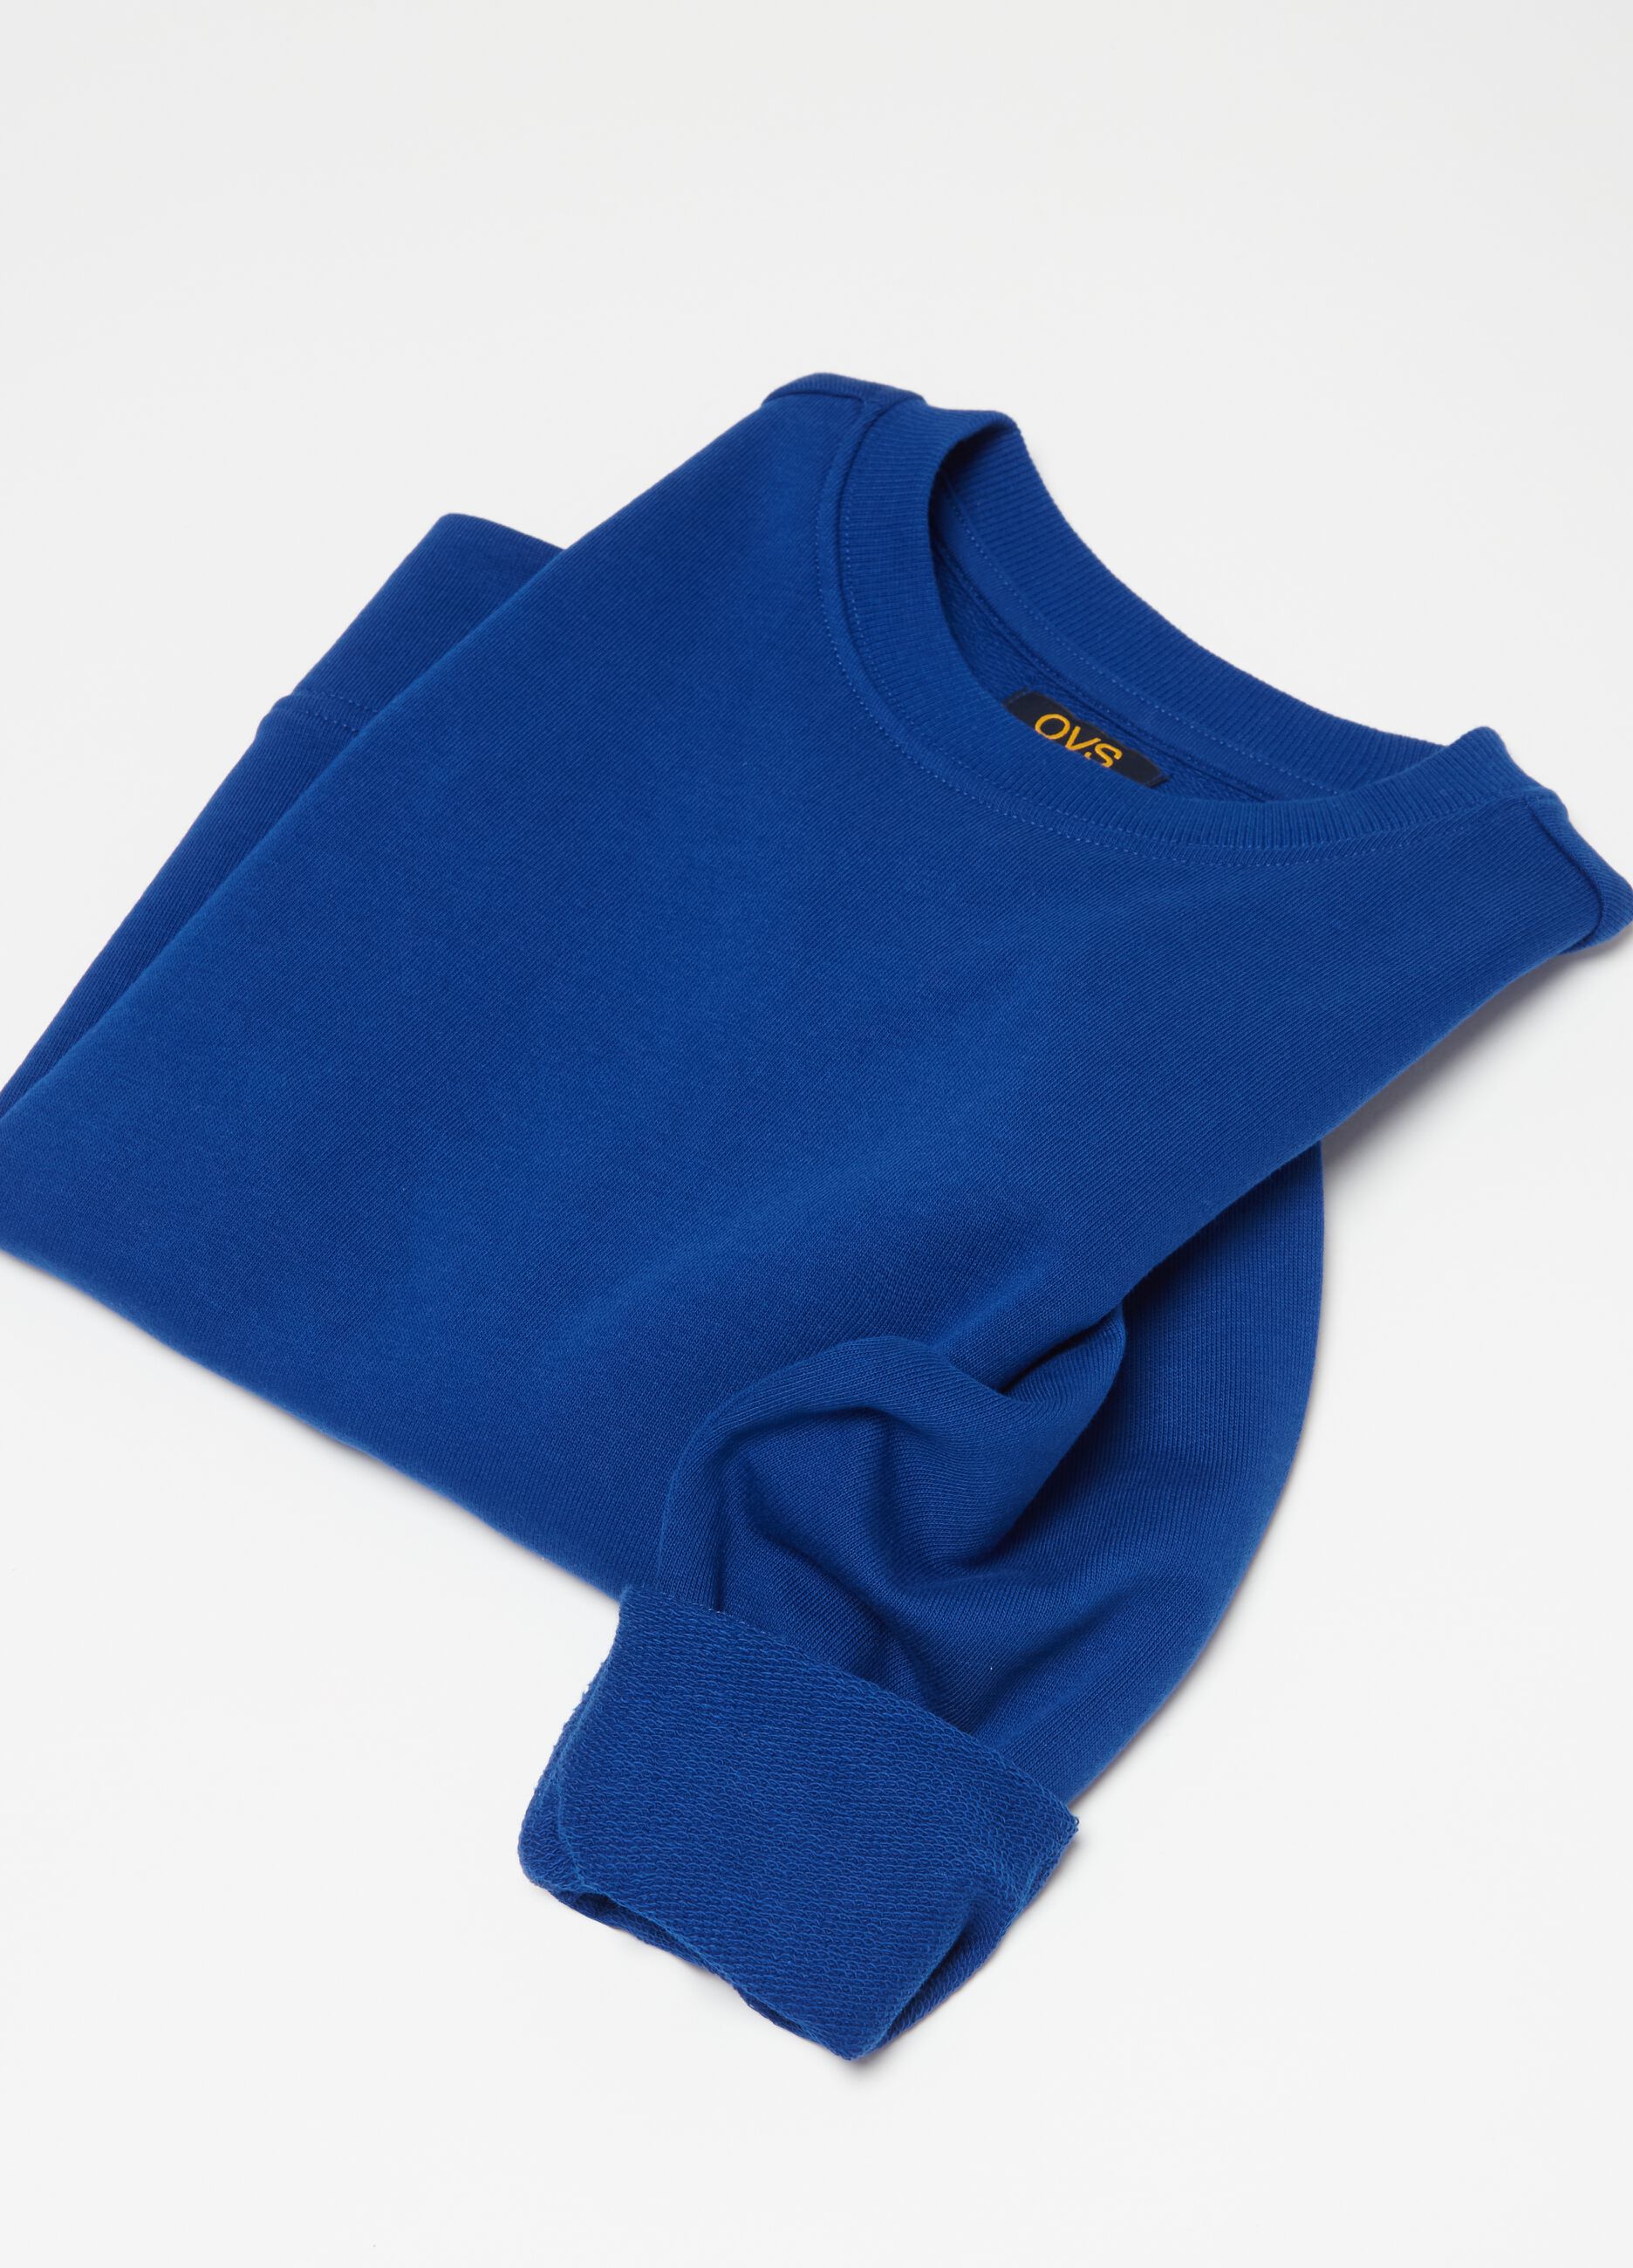 French terry sweatshirt with round neck